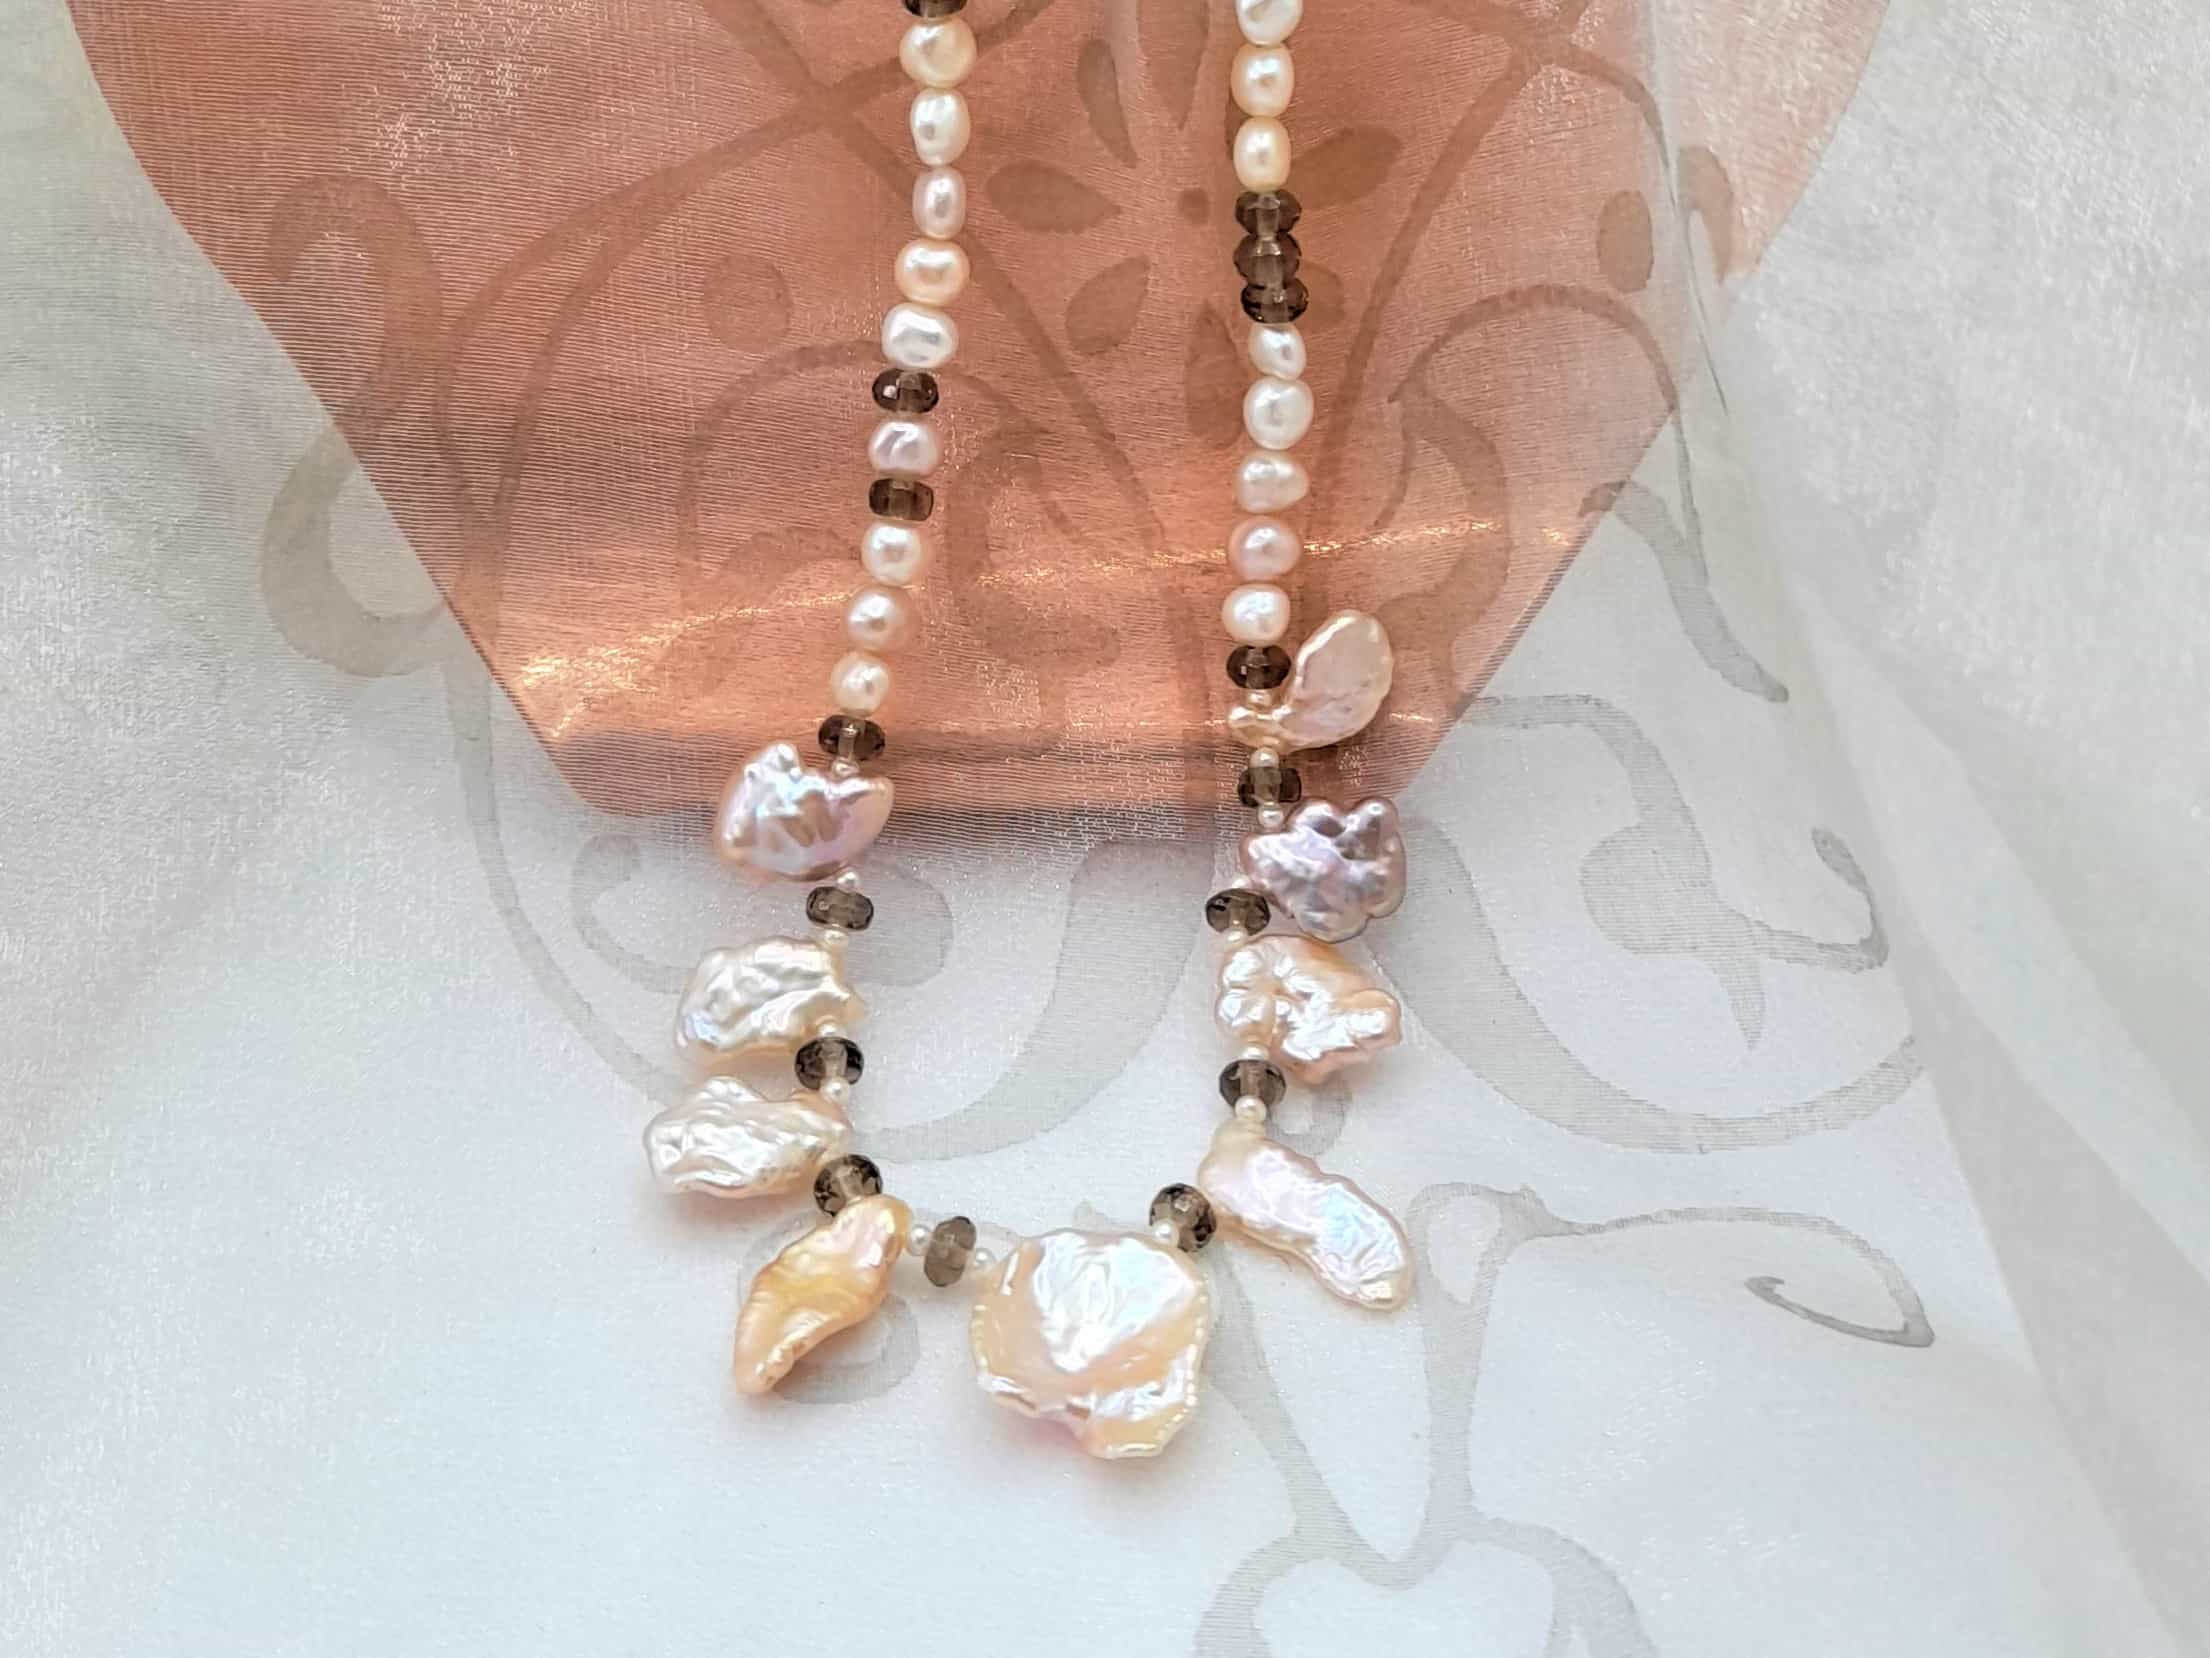 Delicate Natural Coloured Freshwater Pearl Necklace featuring Keshi Pearls and Faceted Smoky Quartz beads, finished with a Sterling Silver Clasp